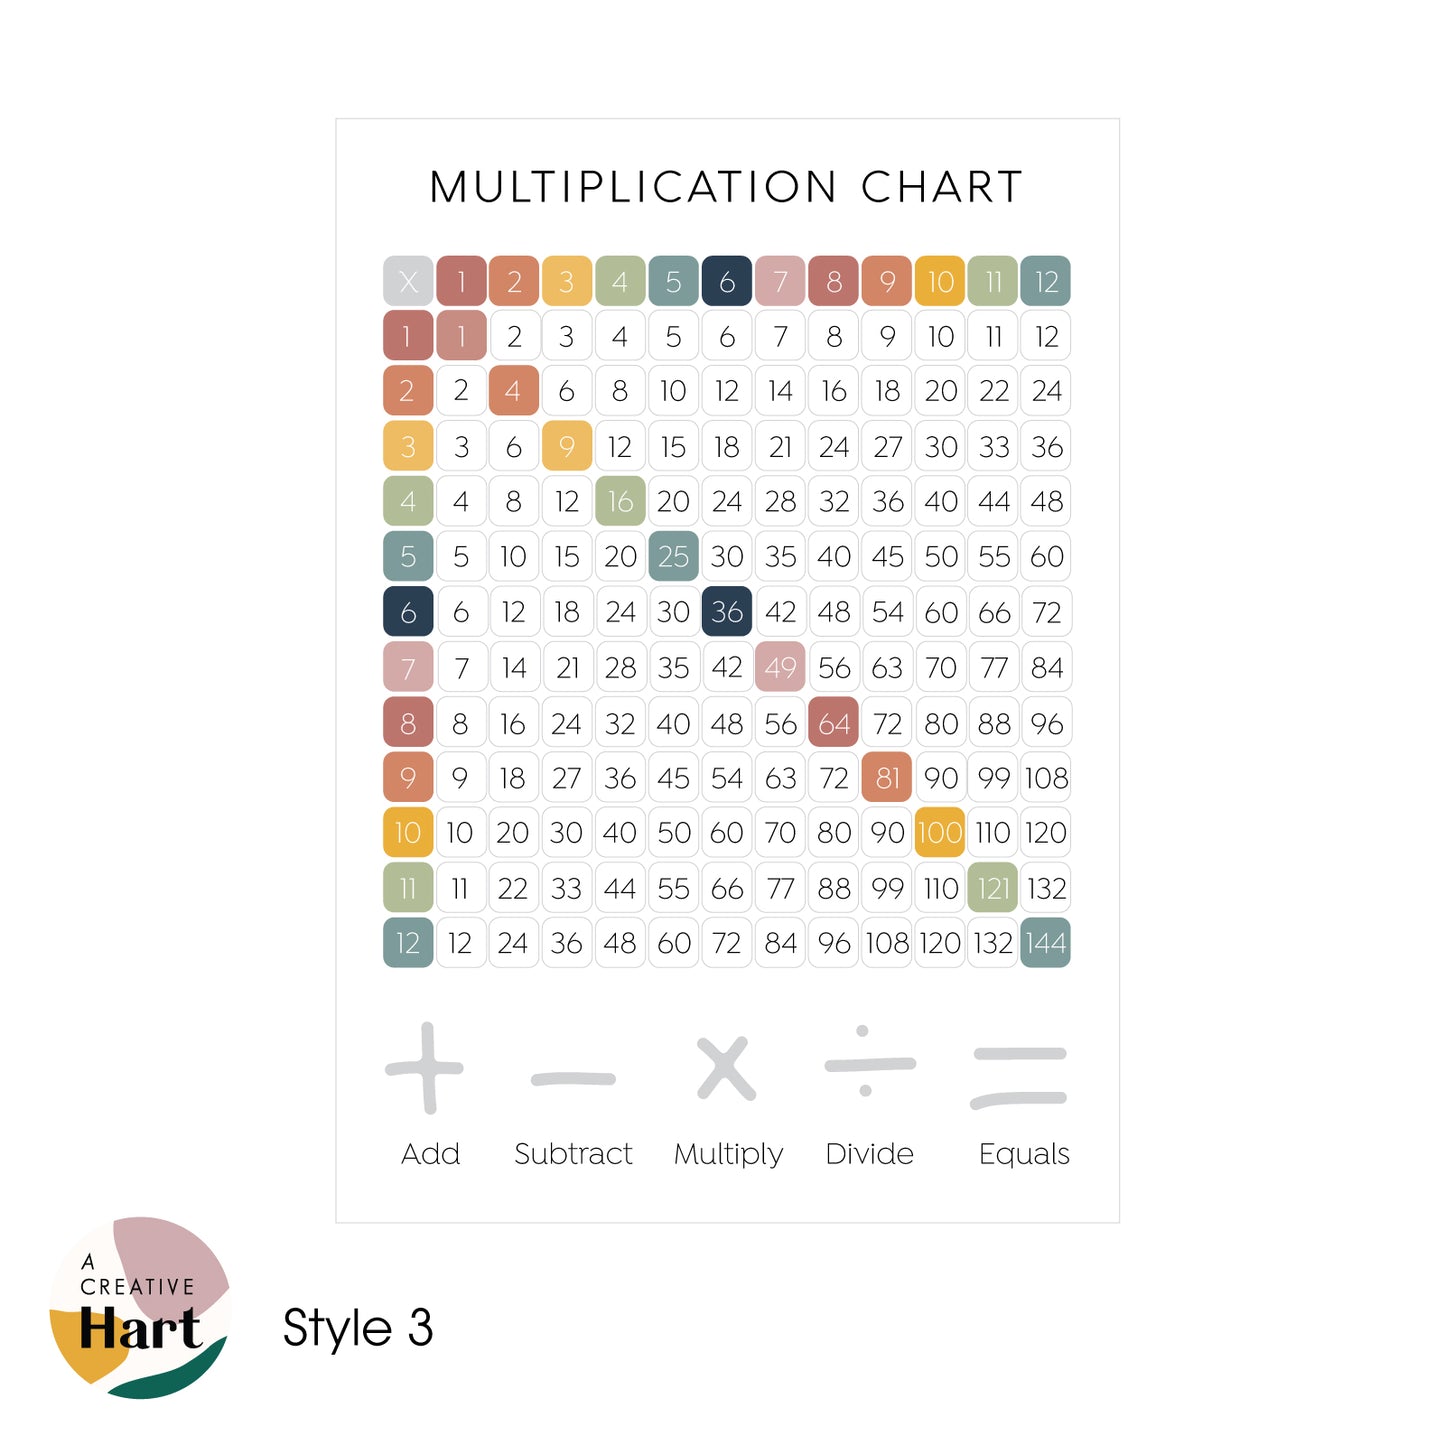 Multiplication Chart - Times Tables Fabric Wall Decal - A Creative Hart